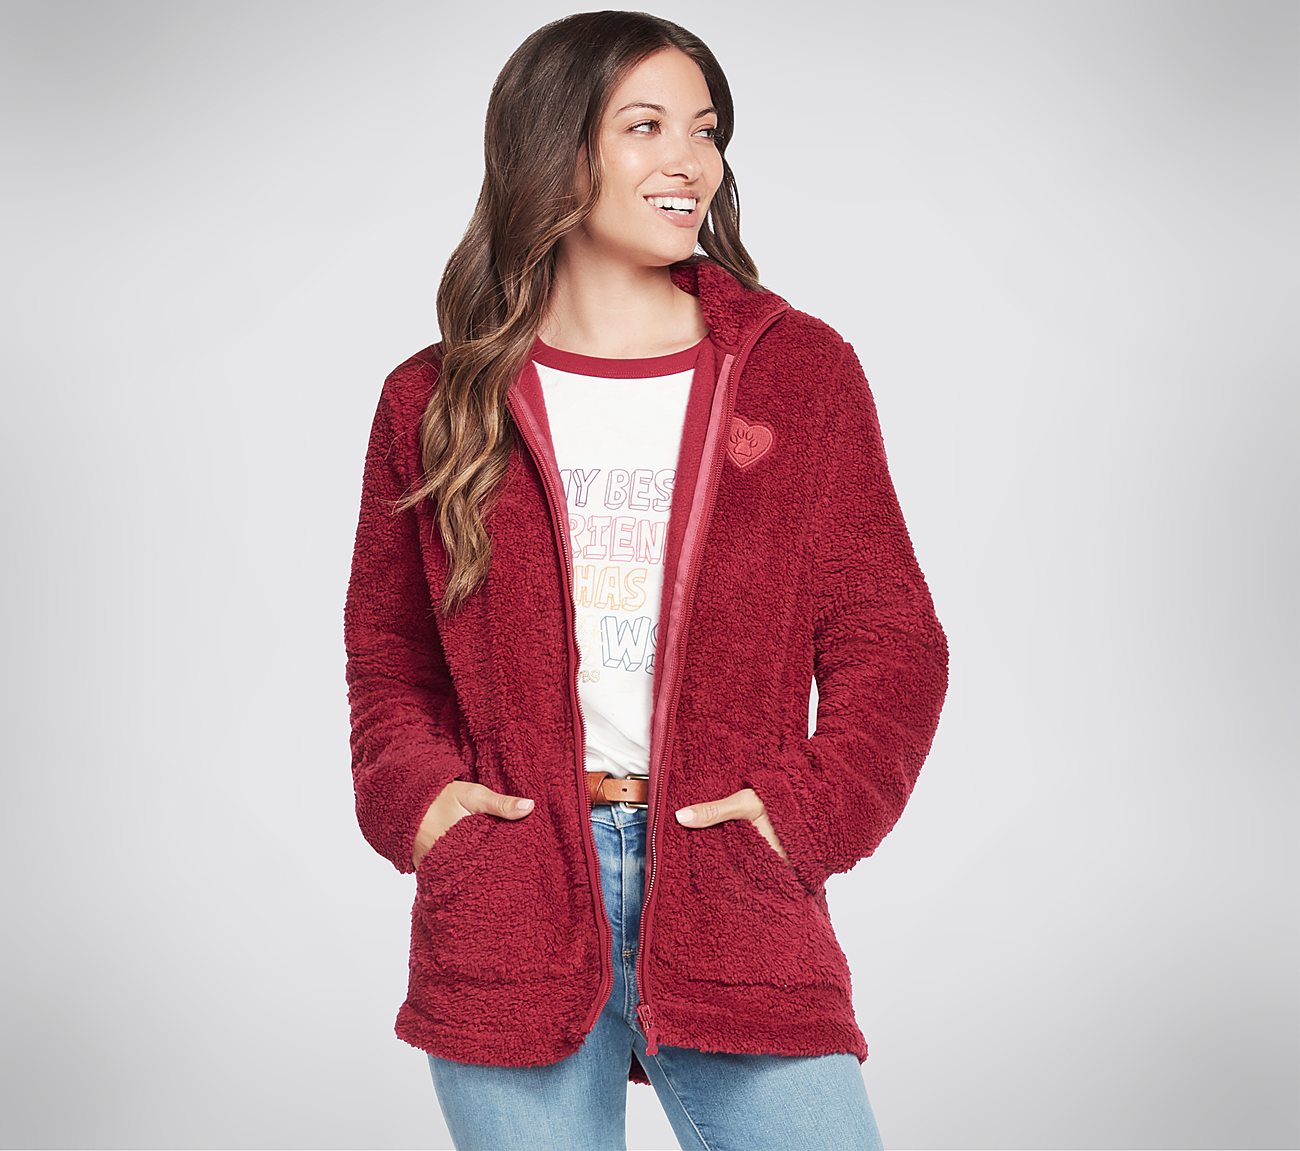 BOBS SHERPA FZ JACKET, RASPBERRY Apparel Lateral View